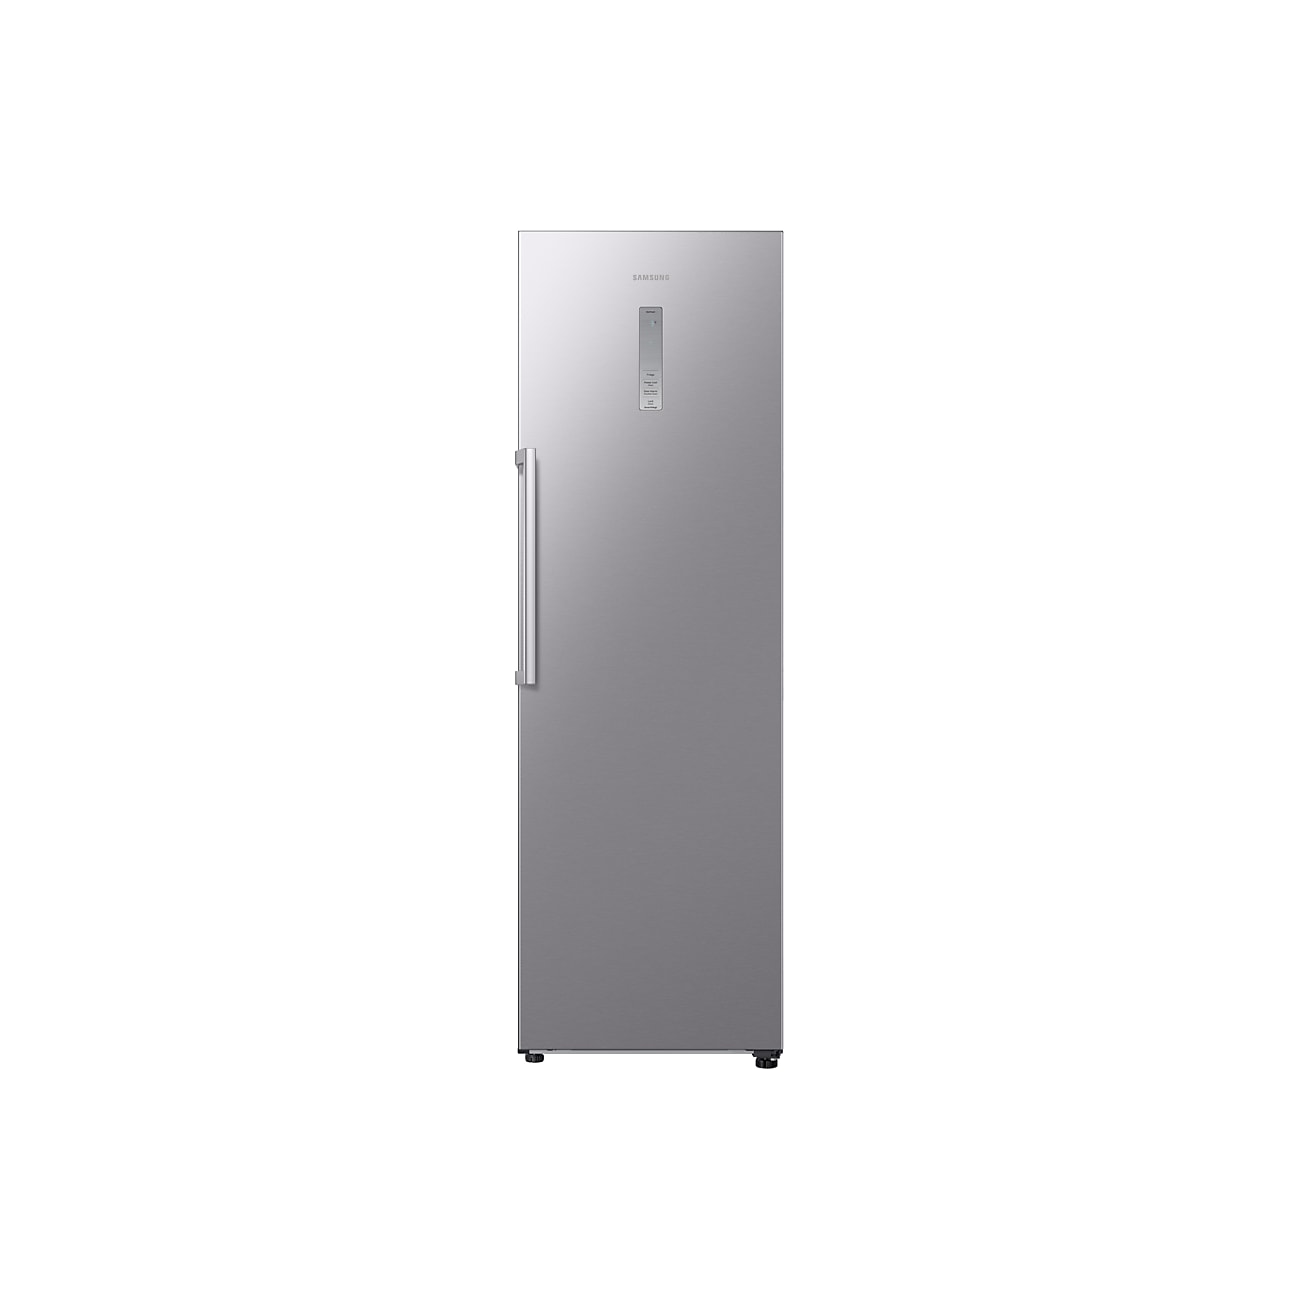 Samsung RR7000 RR39C7BJ5SA/EU Tall One Door Fridge with Wi-Fi Embedded & SmartThings - Silver